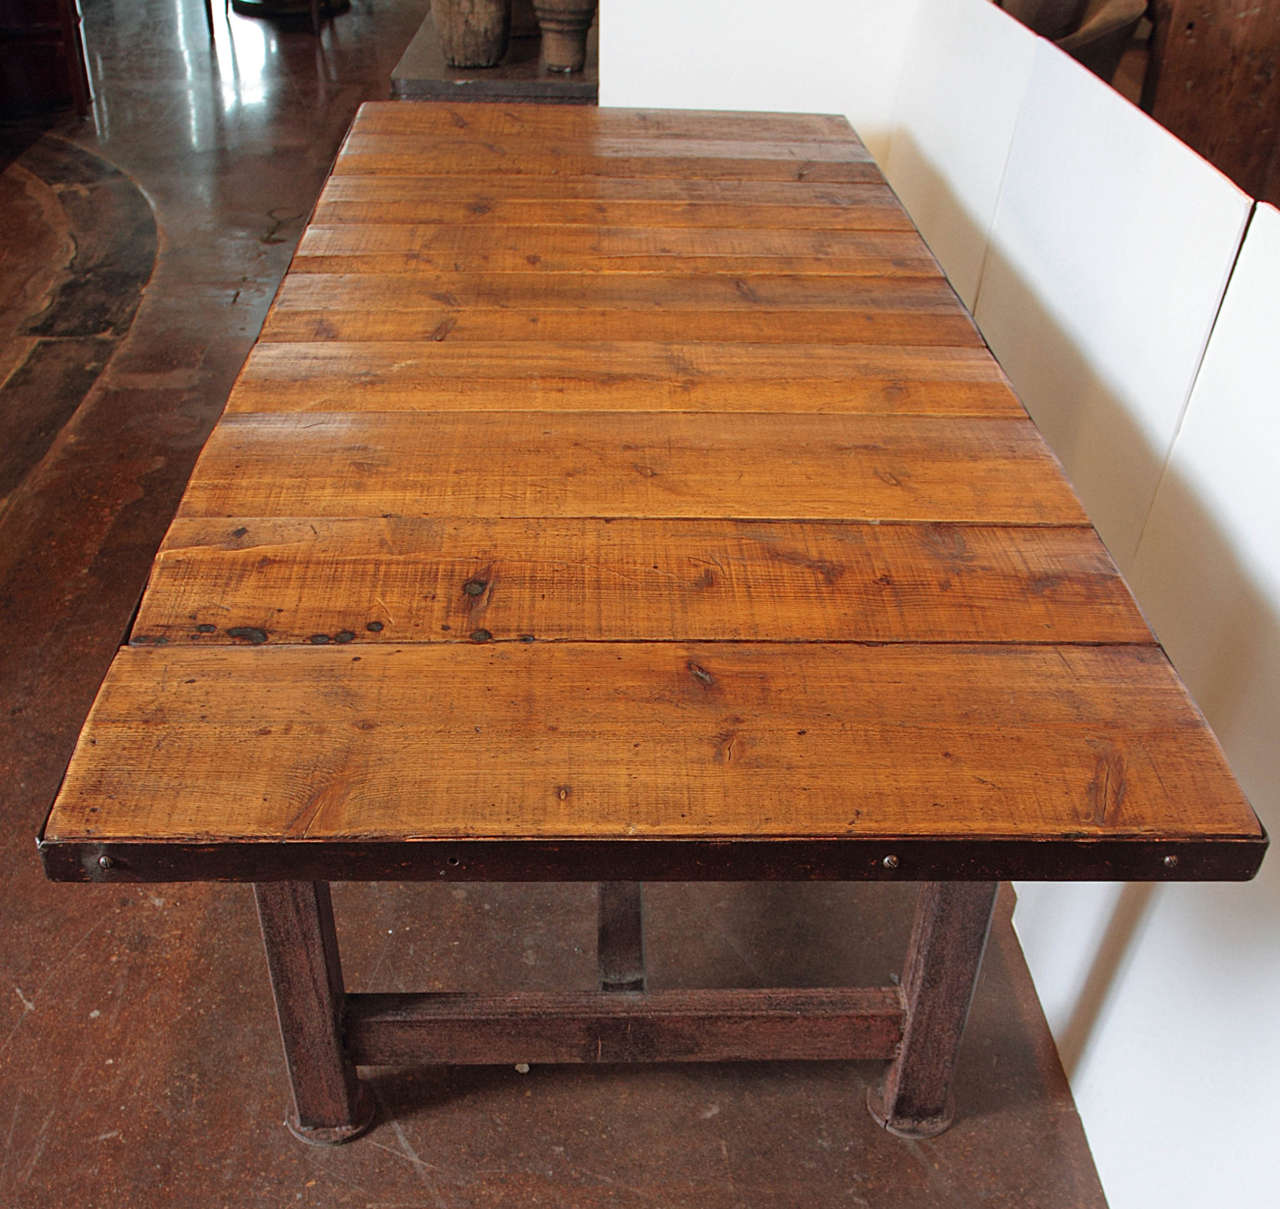 Reclaimed Vintage Industrial Inspired Dining Table made from Reclaimed Elements:
On the tag engraved on this dining table saids 